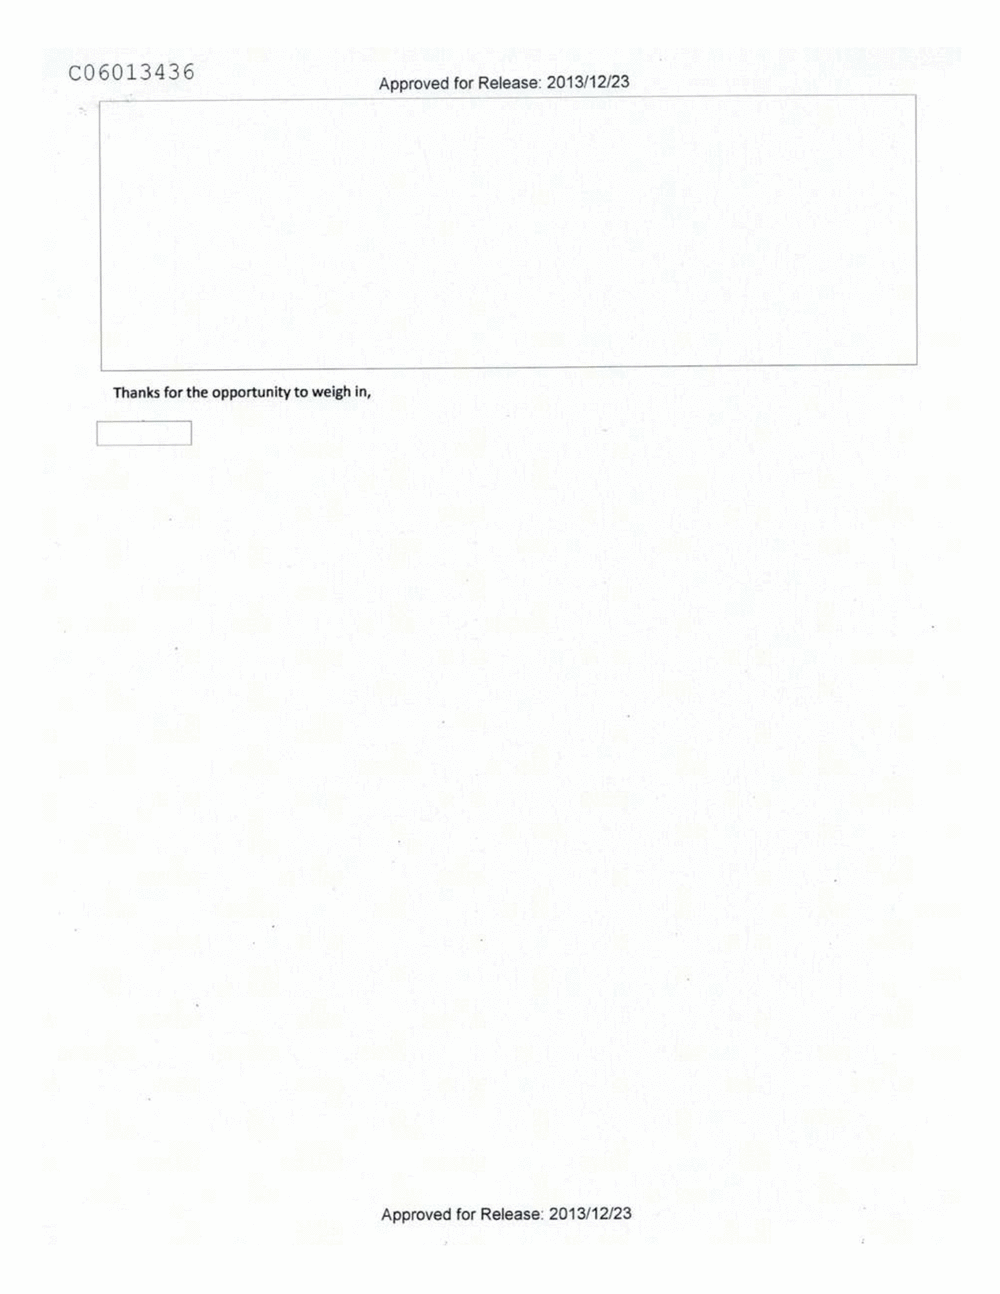 Page 299 from Email Correspondence Between Reporters and CIA Flacks